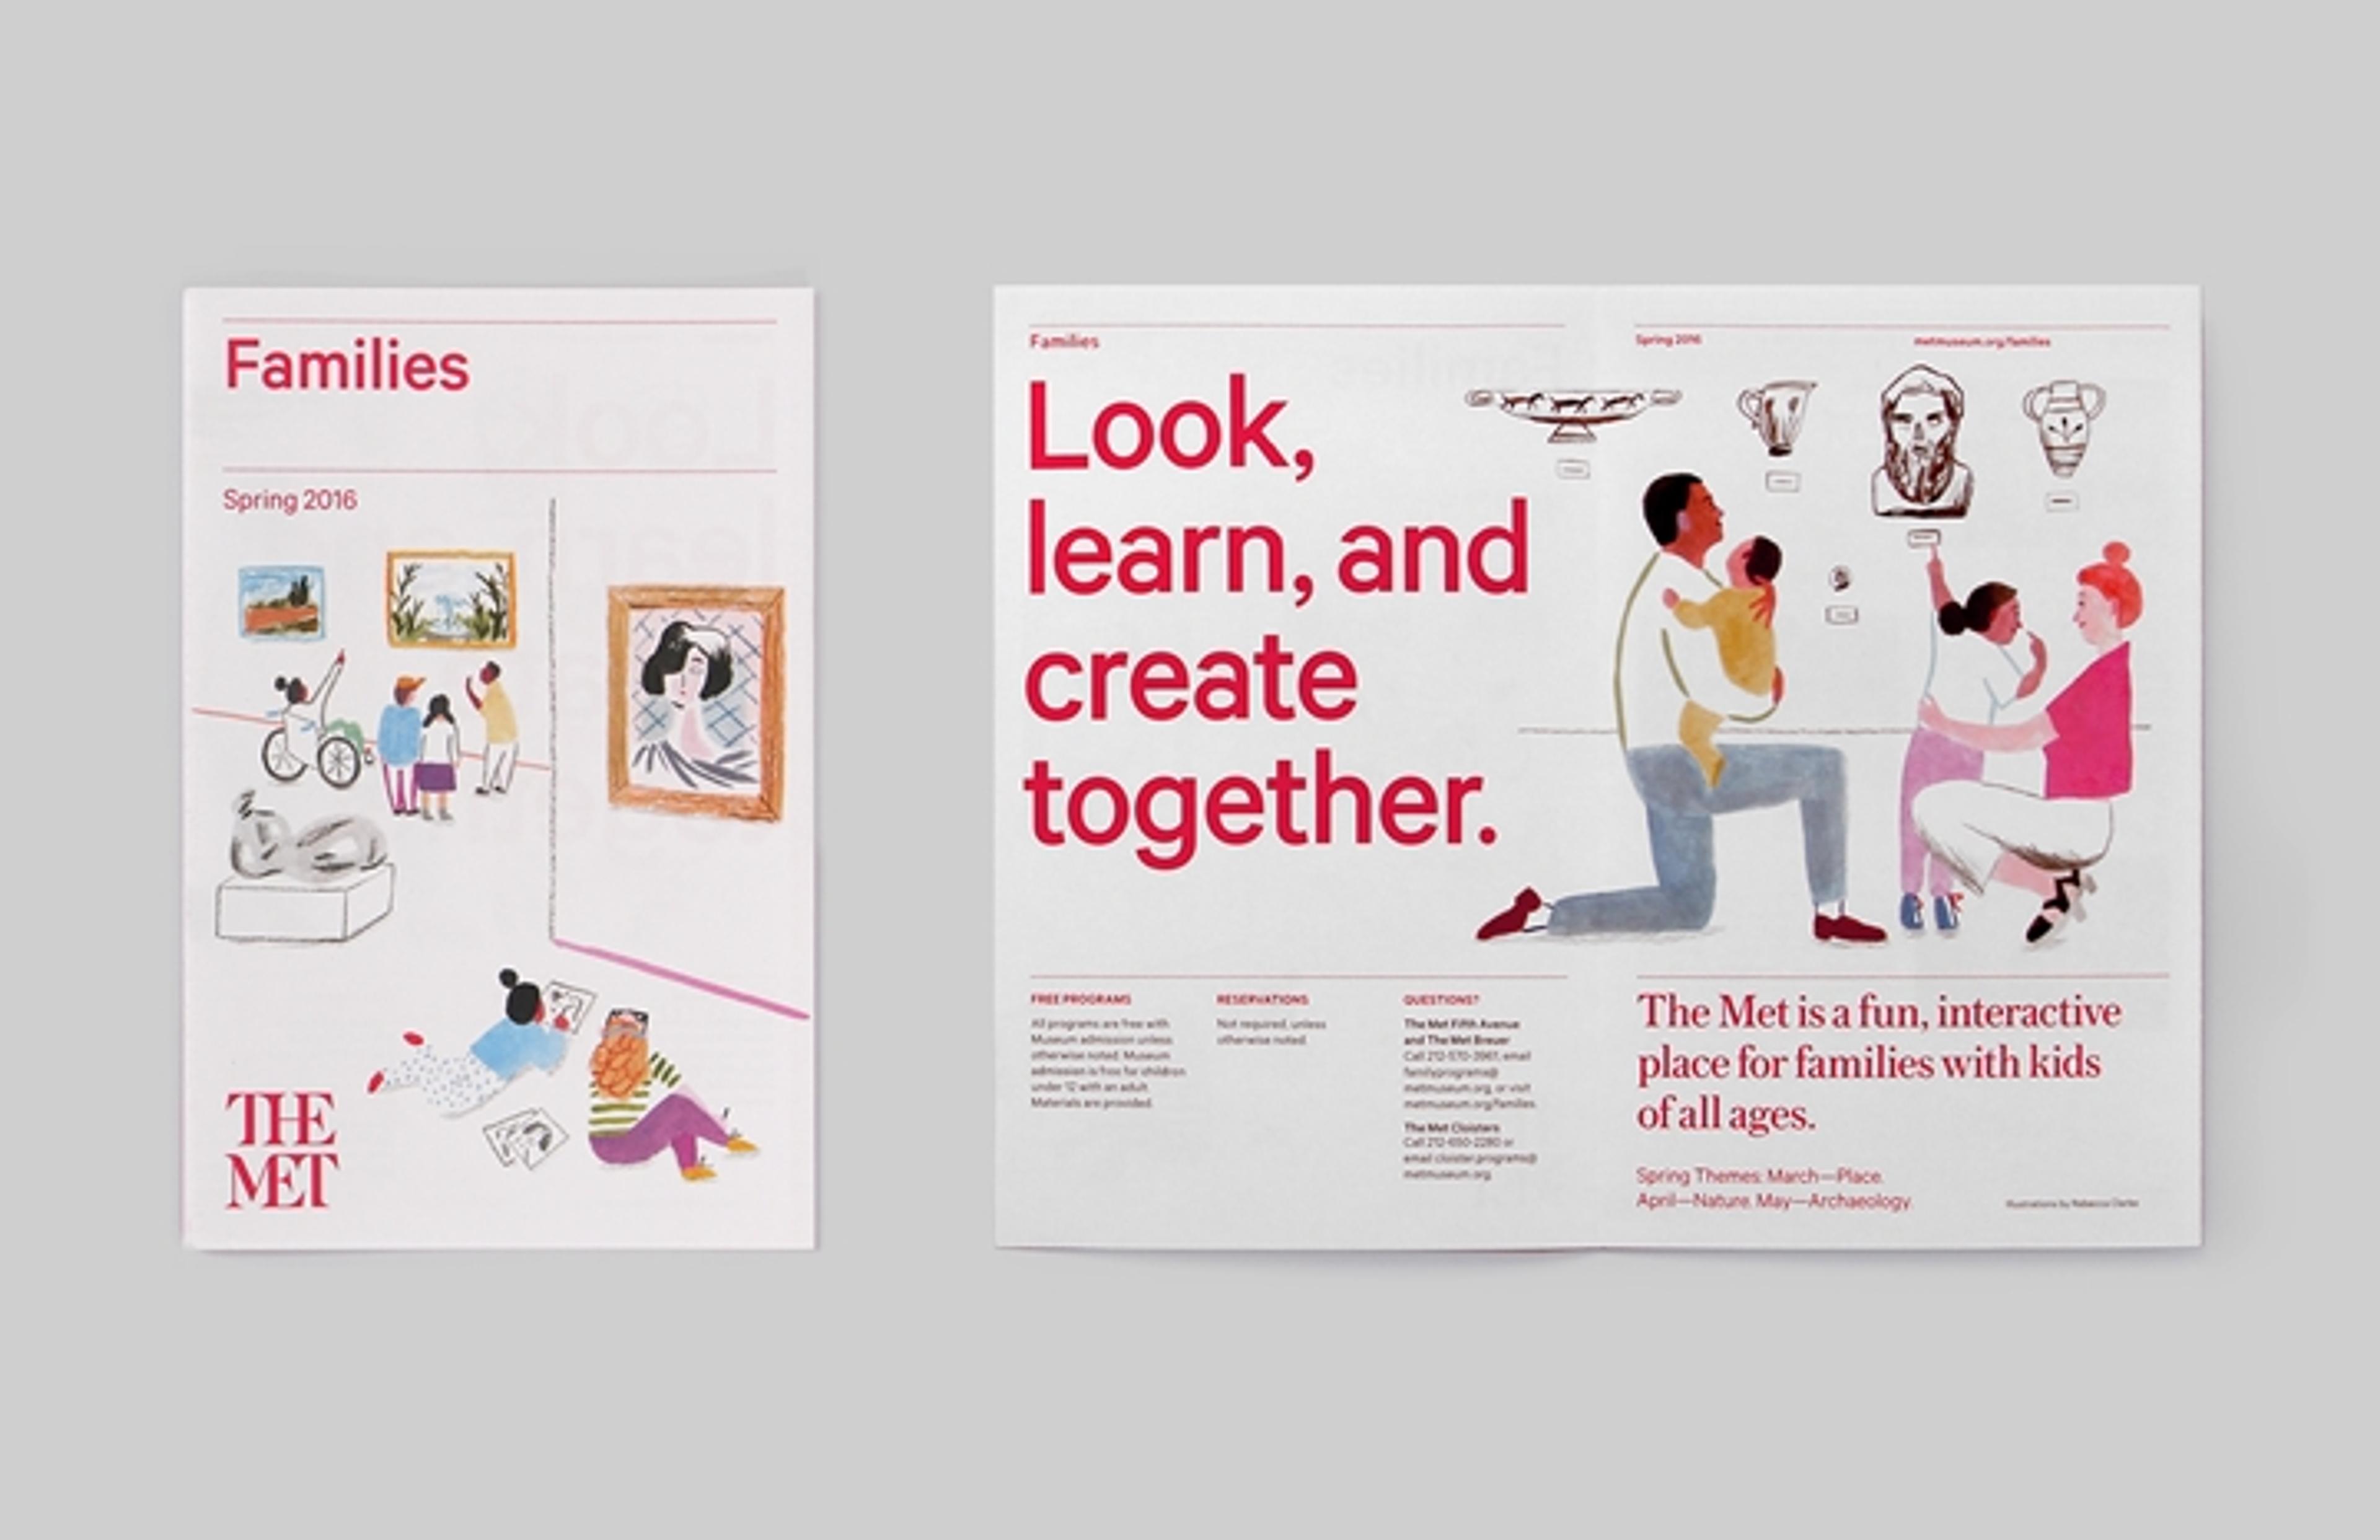 The Met's brand identity shown on print pieces for families